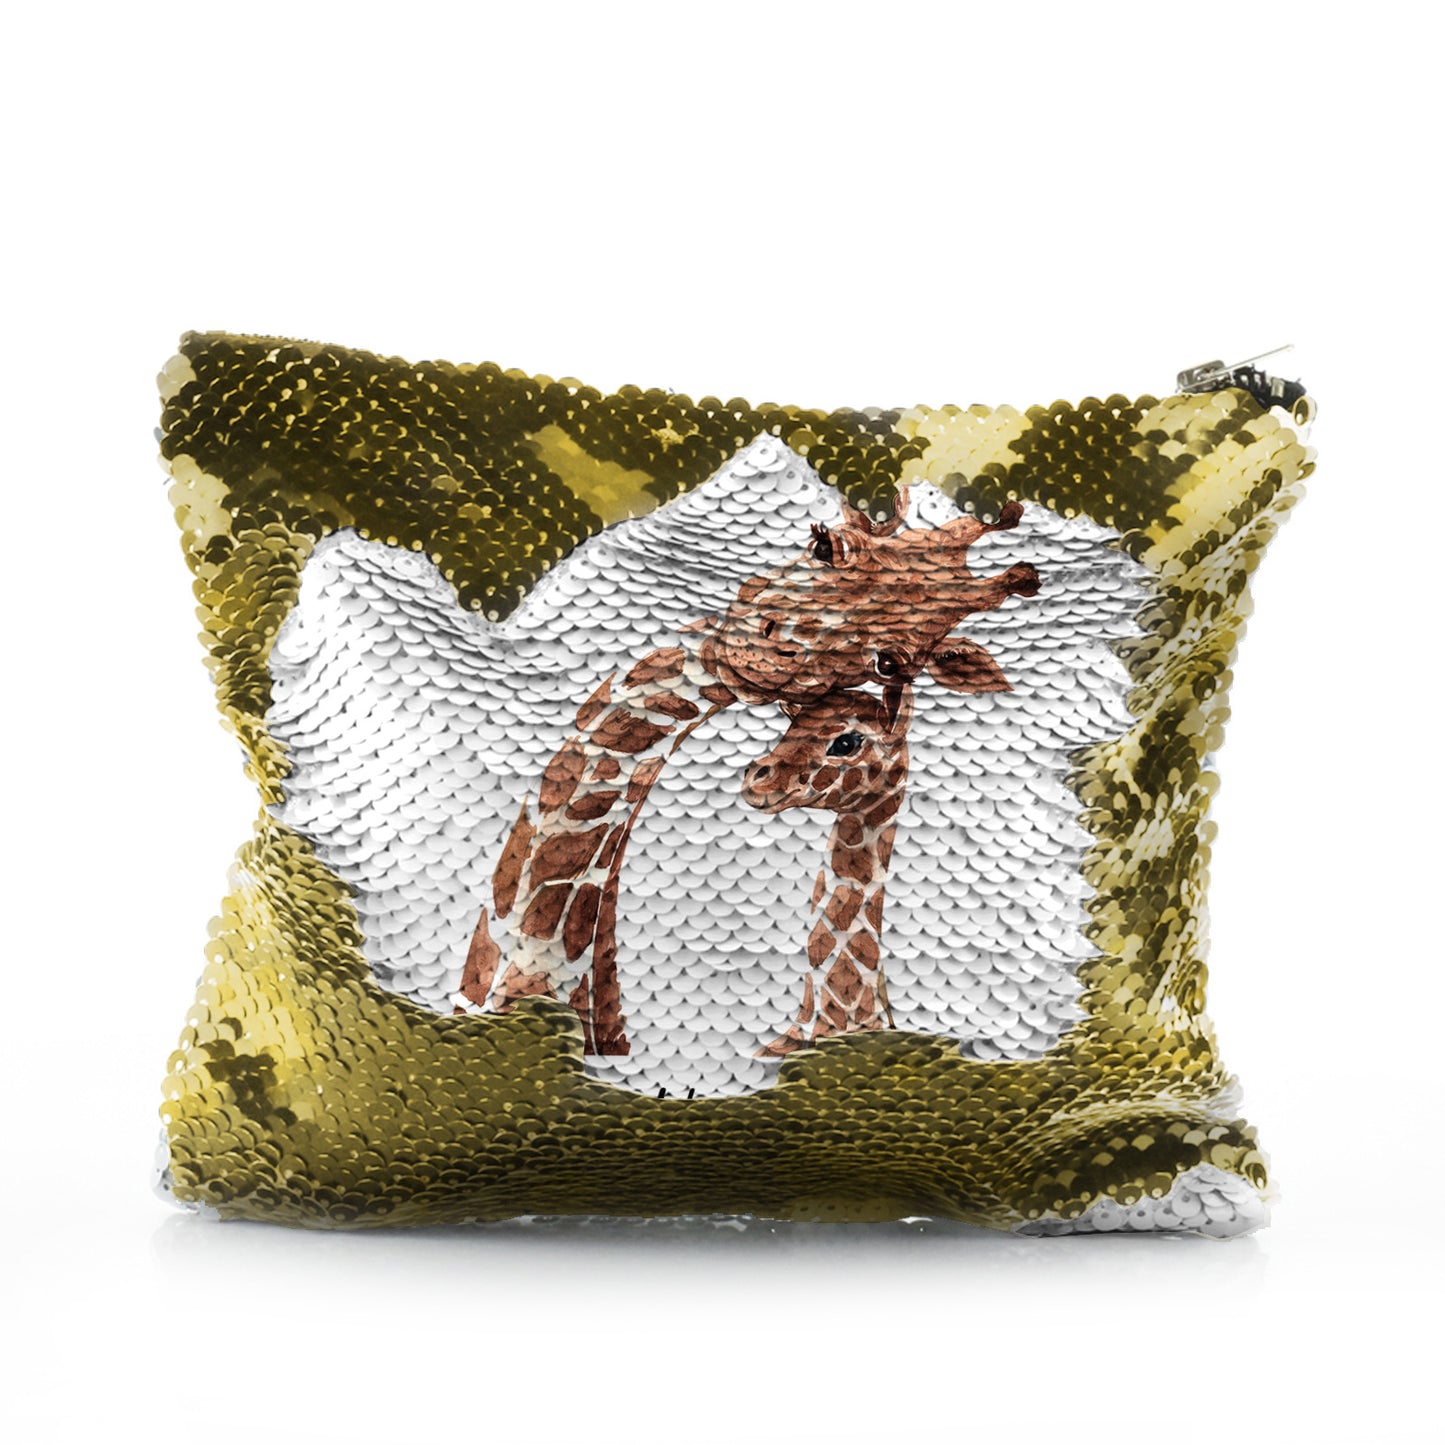 Personalised Sequin Zip Bag with Welcoming Text and Relaxing Mum and Baby Giraffes